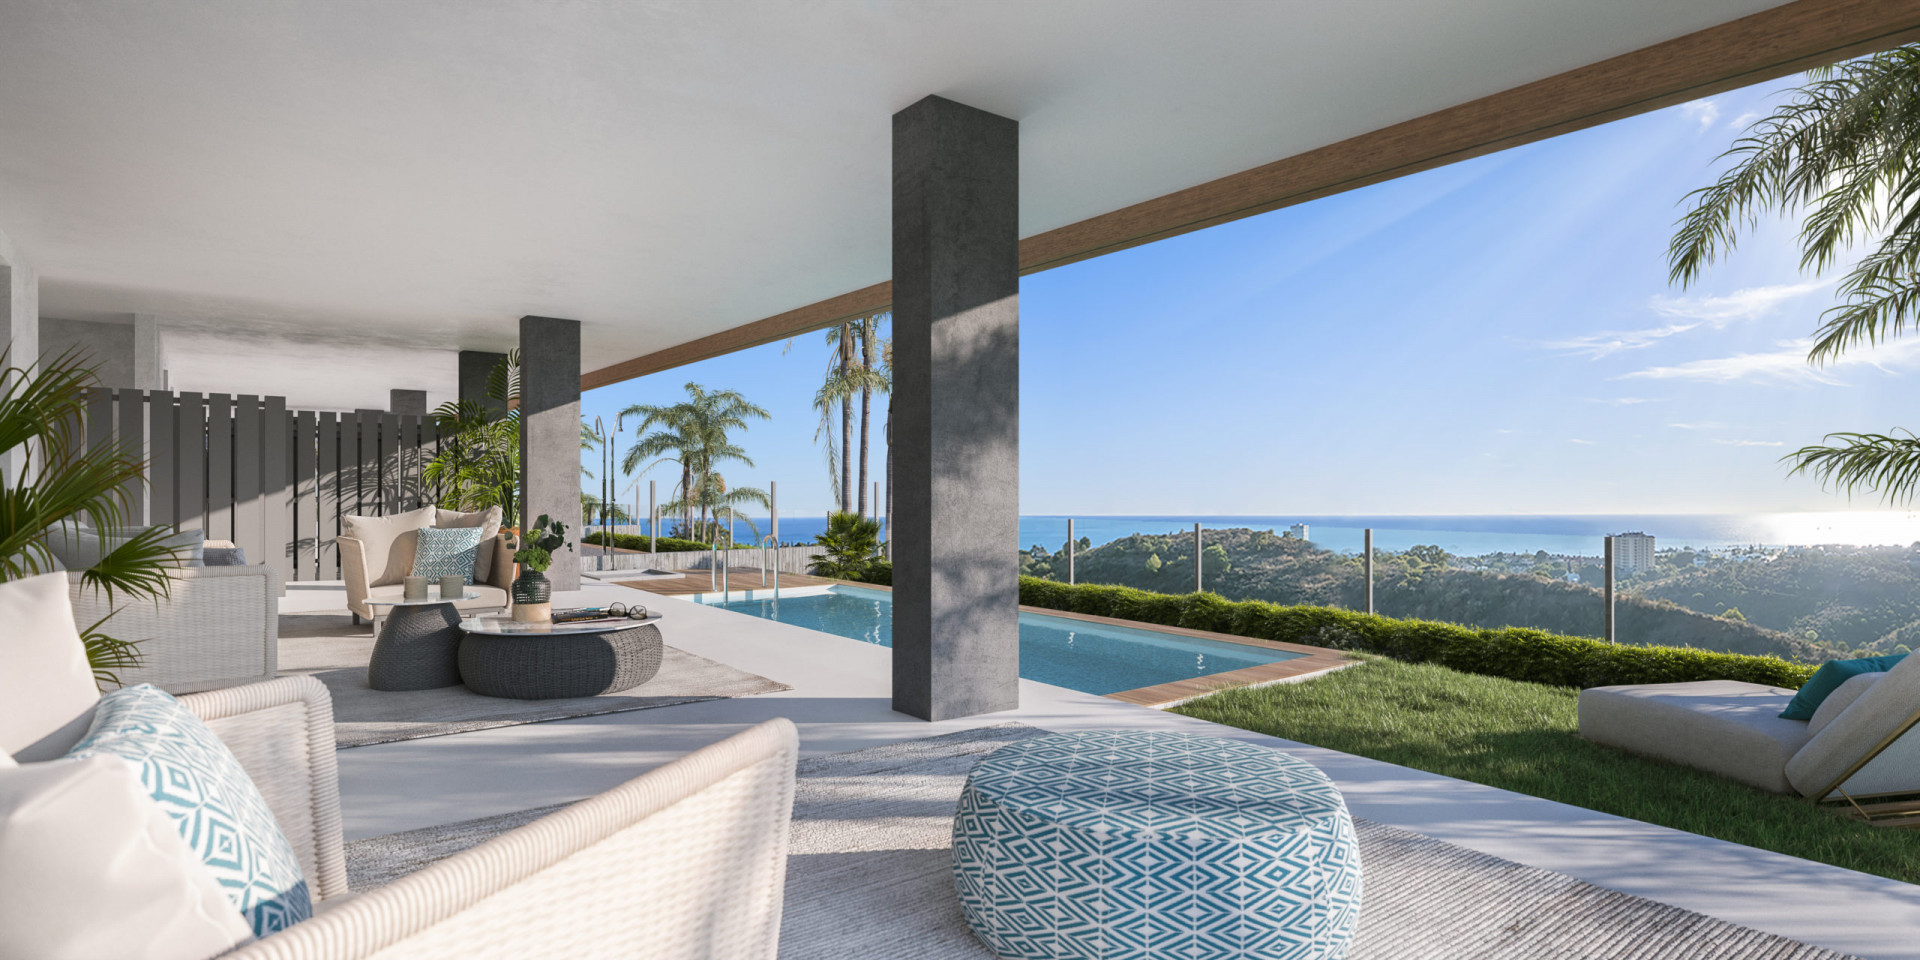 Spacious flat with garden and private pool located east of Marbella. | Image 4